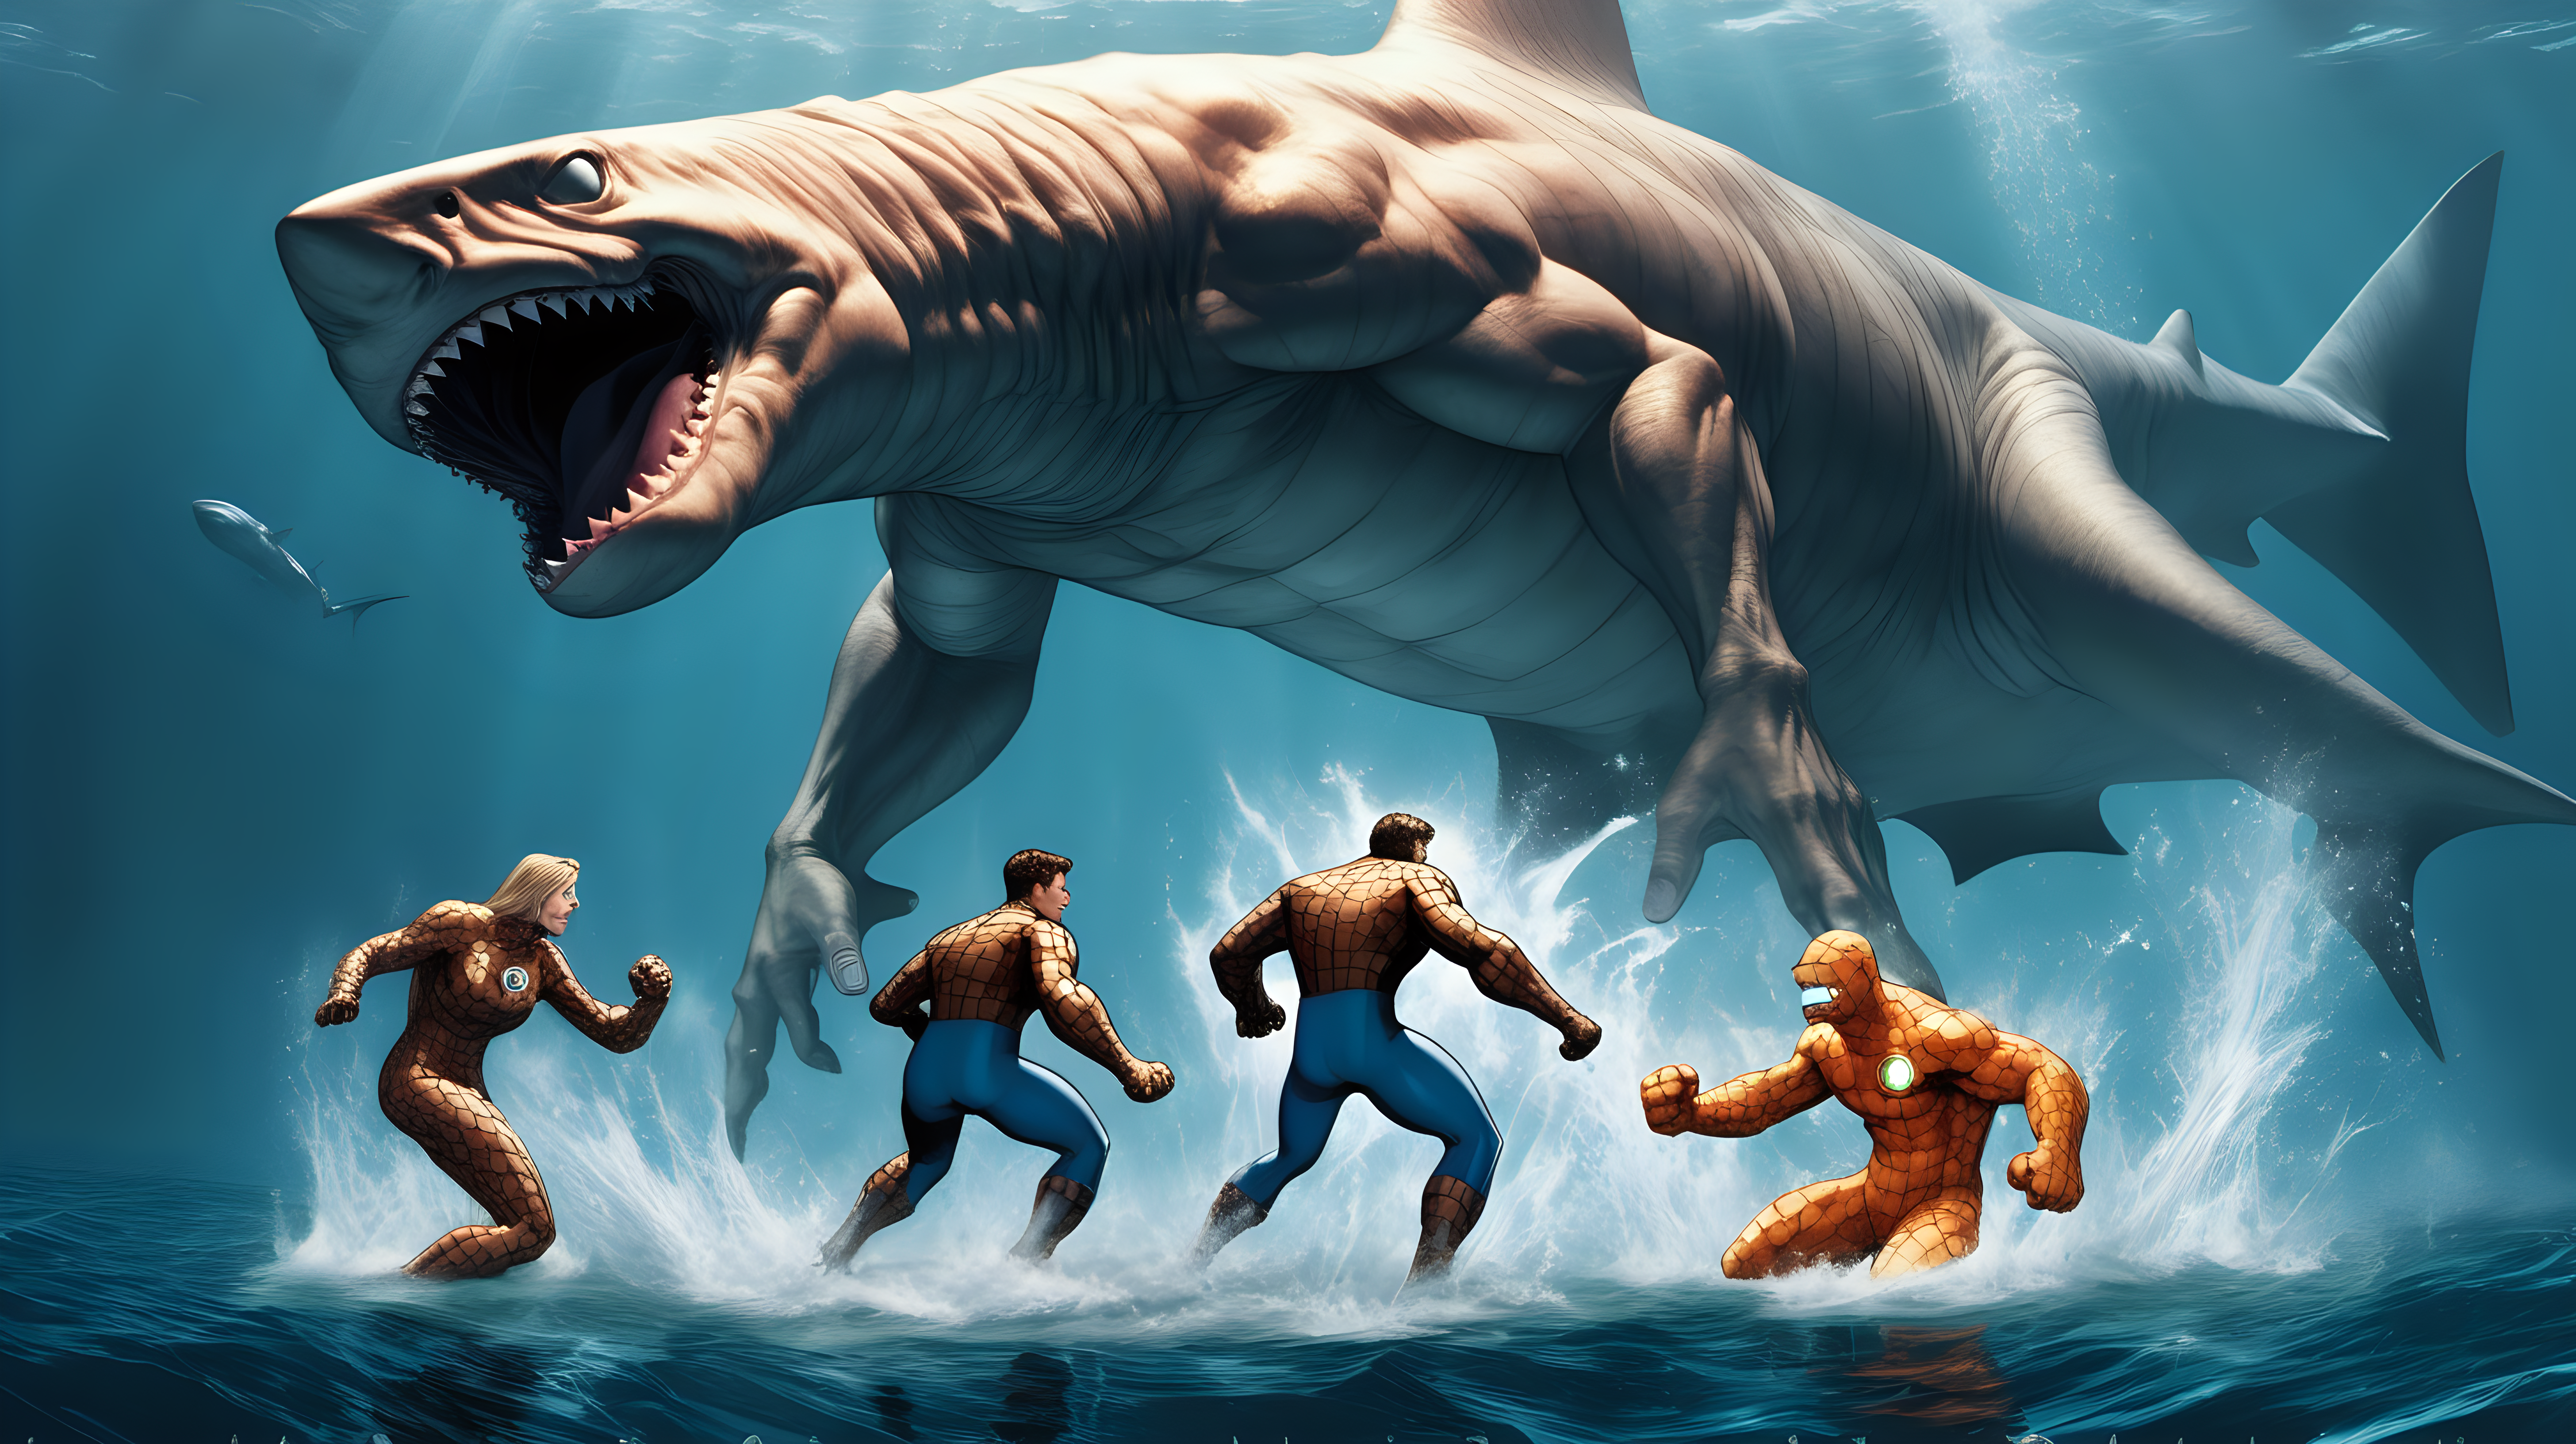 The Fantastic Four fights a giant shark with legs and wings underwater